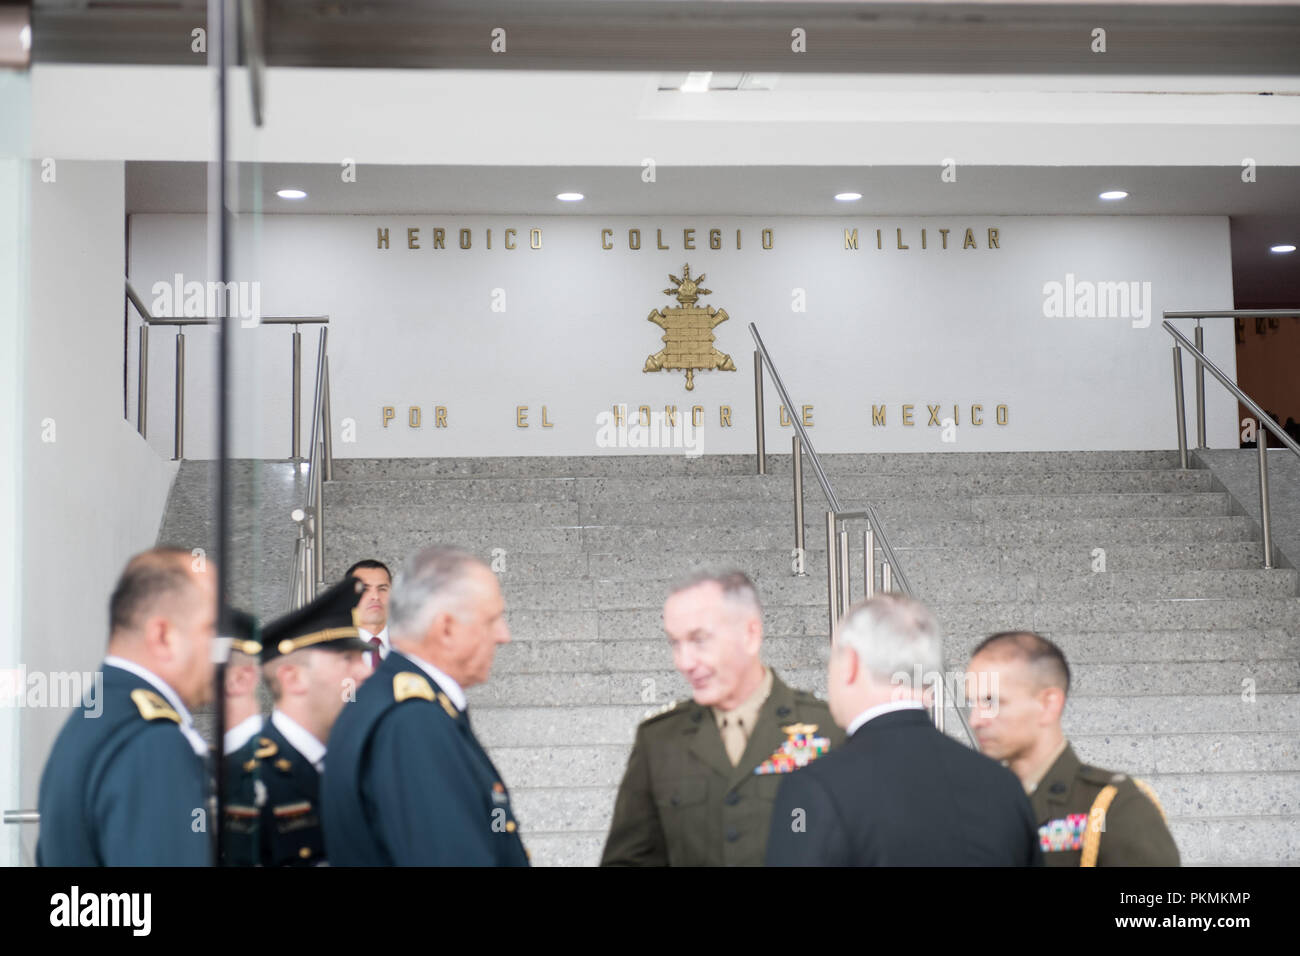 Mexico City, Mexico. 13th Sep, 2018. U.S. Marine Corps Gen. Joe Dunford, chairman of the Joint Chiefs of Staff, greets Mexican Gen. Salvador Cienfuegos Zepeda, Secretary of the Army, and Mexican Adm. Vidal Francisco Soberon Sanz, Secretary of the Navy, before the start of a Military Parade hosted by Mexican President, Enrique PeÐ¦a Nieto, in Mexico City, Mexico, Sept. 13, 2018. Credit: Us Joint Staff/Russian Look/ZUMA Wire/Alamy Live News Stock Photo